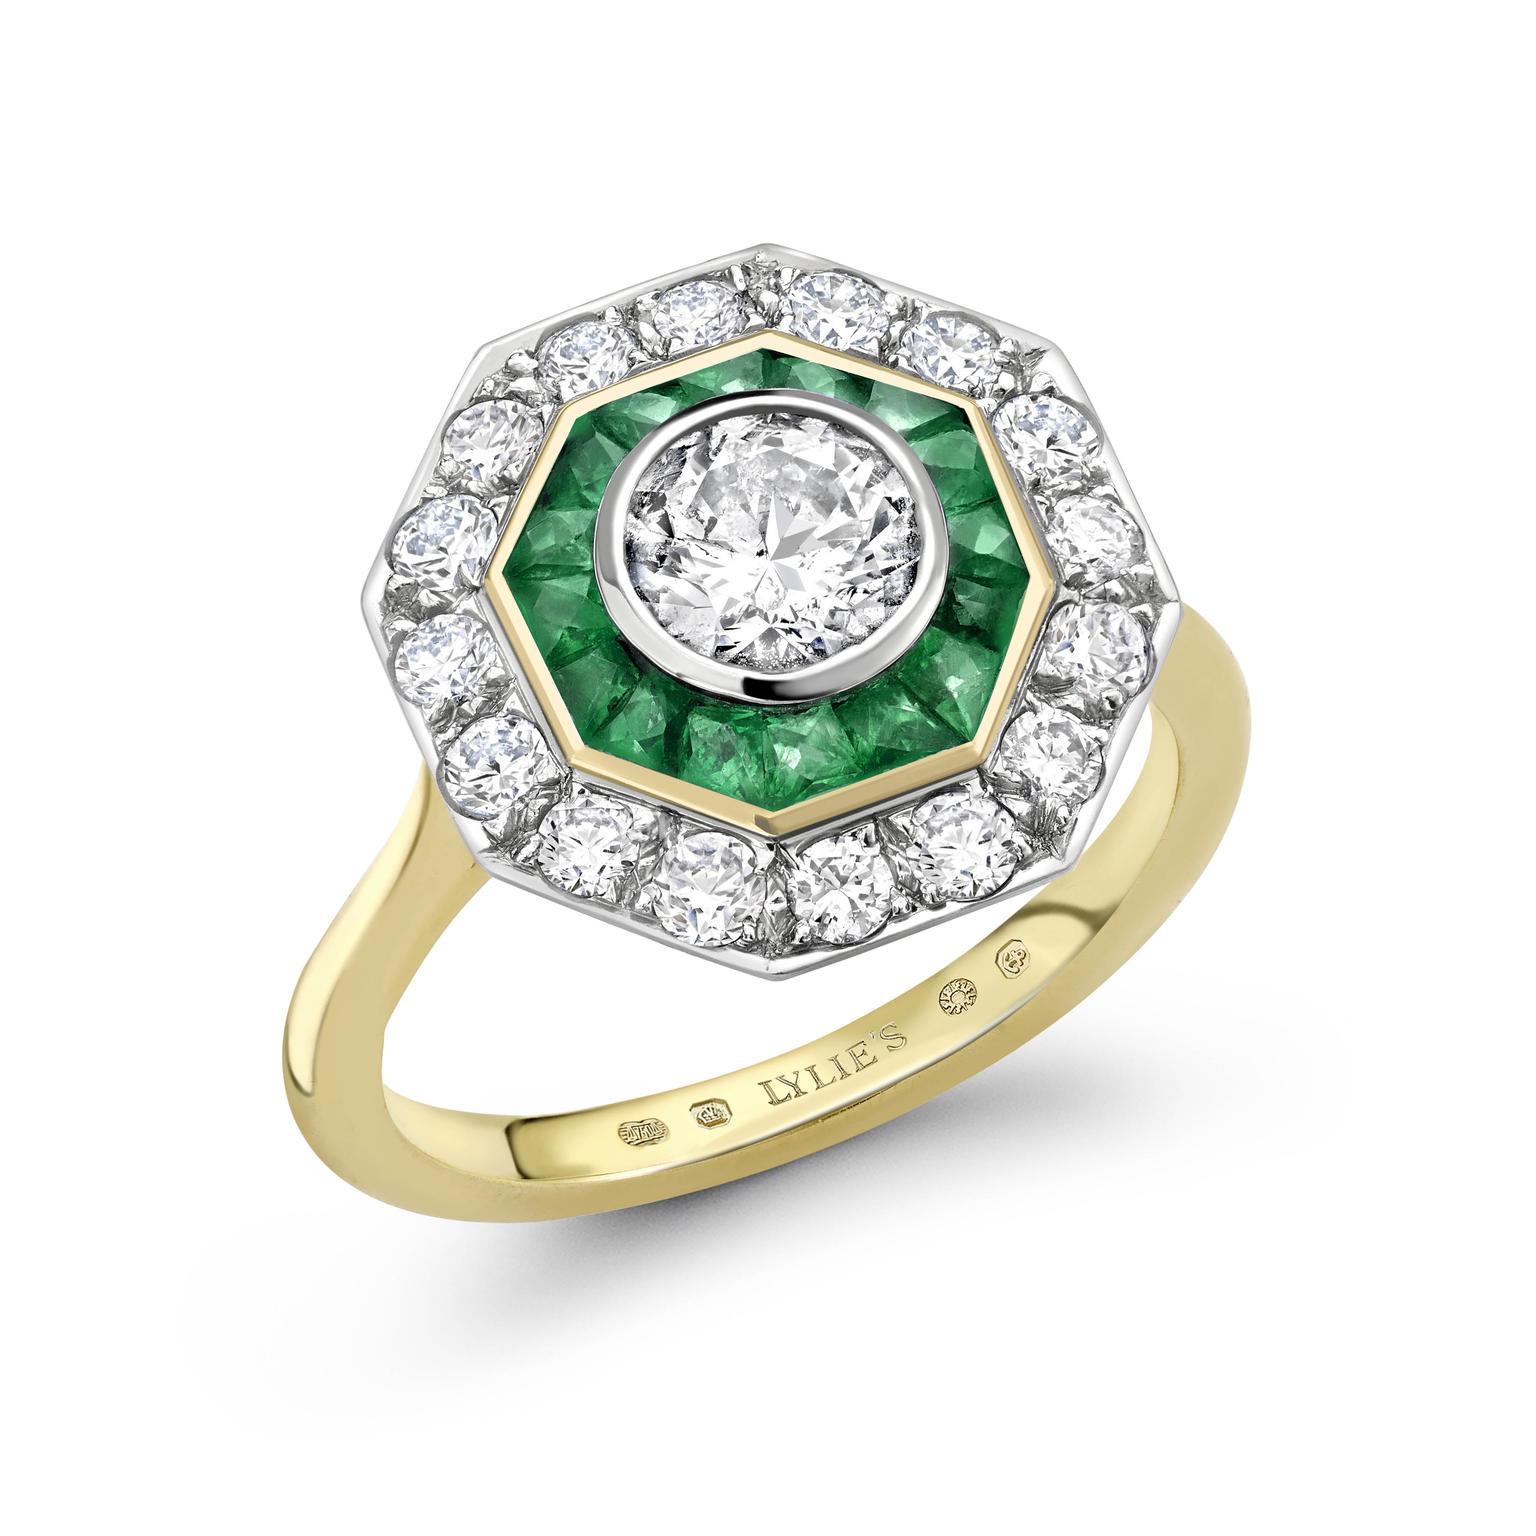 Emerald and diamond Bespoke Engagement ring by Lylie